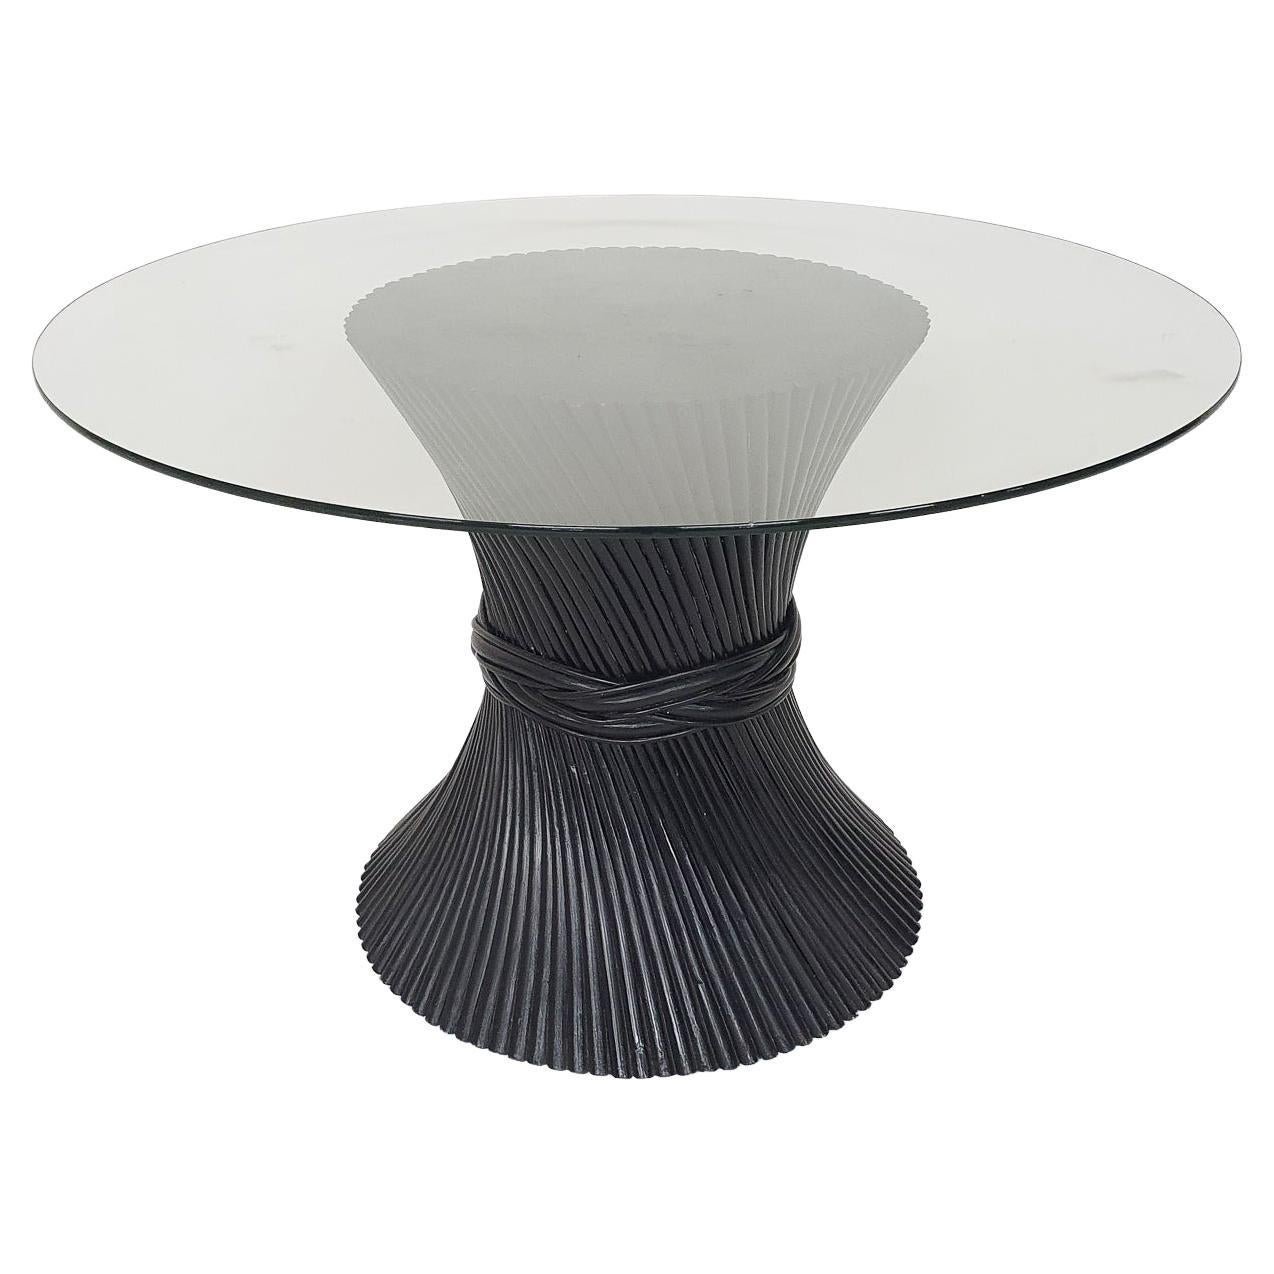 Bamboo and Glass McGuire "Wheet" Dining Table, U.S.A, 1970's